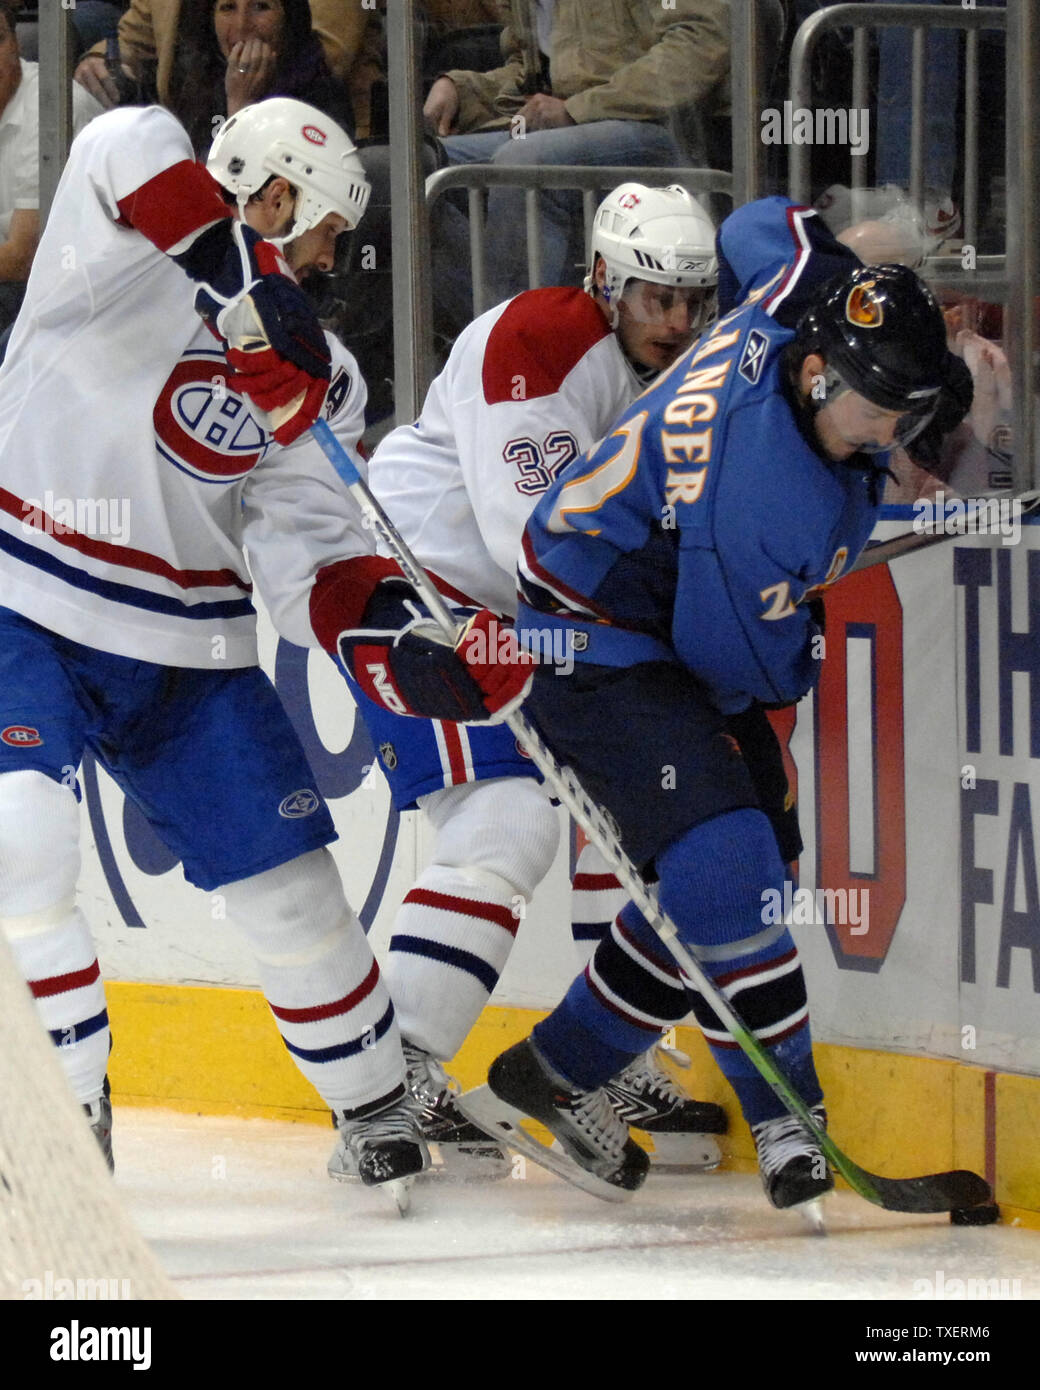 Montreal Canadiens Sheldon Souray (44) and teammate Mark Streit (32) of Switzerland battle with Atlanta Thrashers Eric Belanger (22) for the puck in the third period at Philips Arena in Atlanta, March 8, 2007.  The Thrashers defeated the Canadiens 6-2. (UPI Photo/John Dickerson) Stock Photo